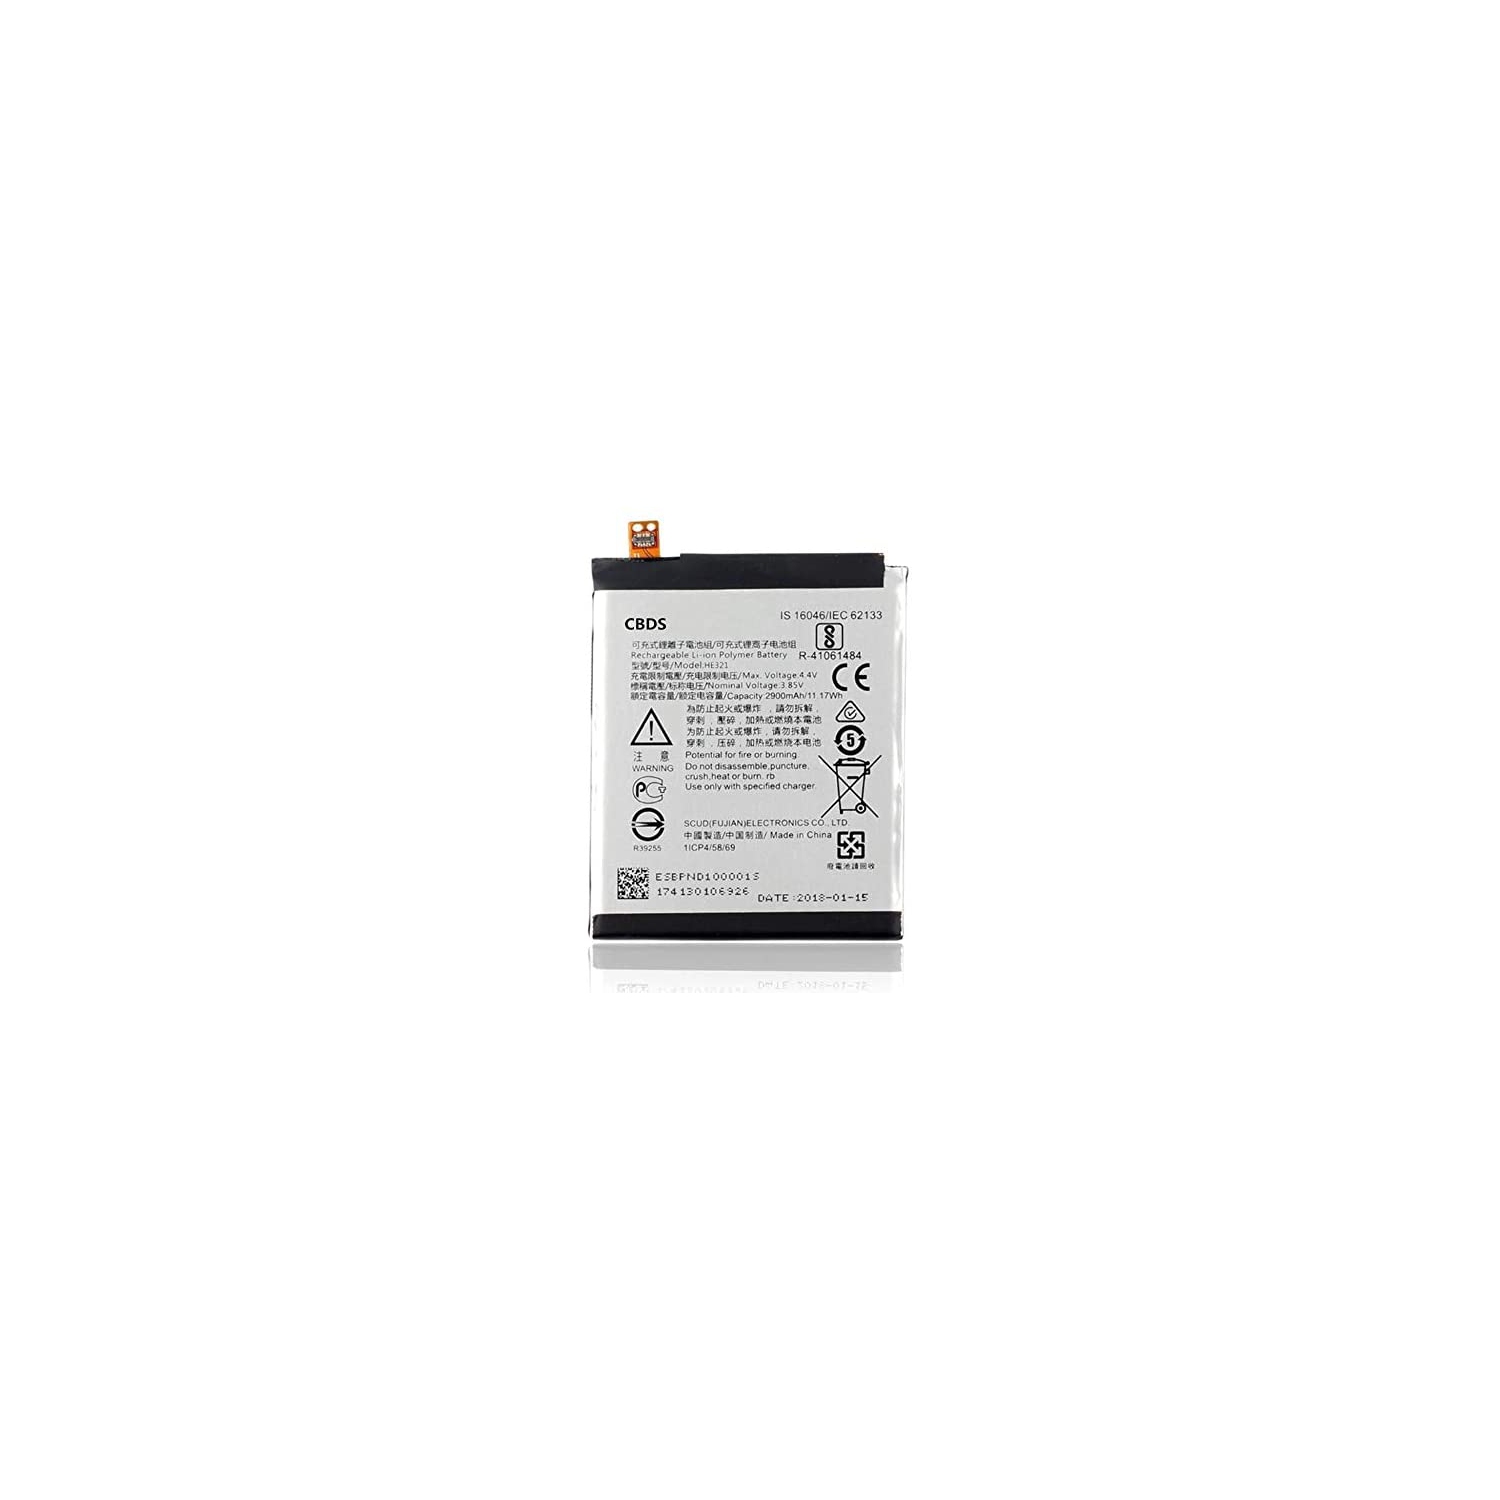 (CBDS) 2900mAh, 11.17 Wh Replacement Battery - Compatible with Nokia 5 HE321 in Non-Retail Packaging.